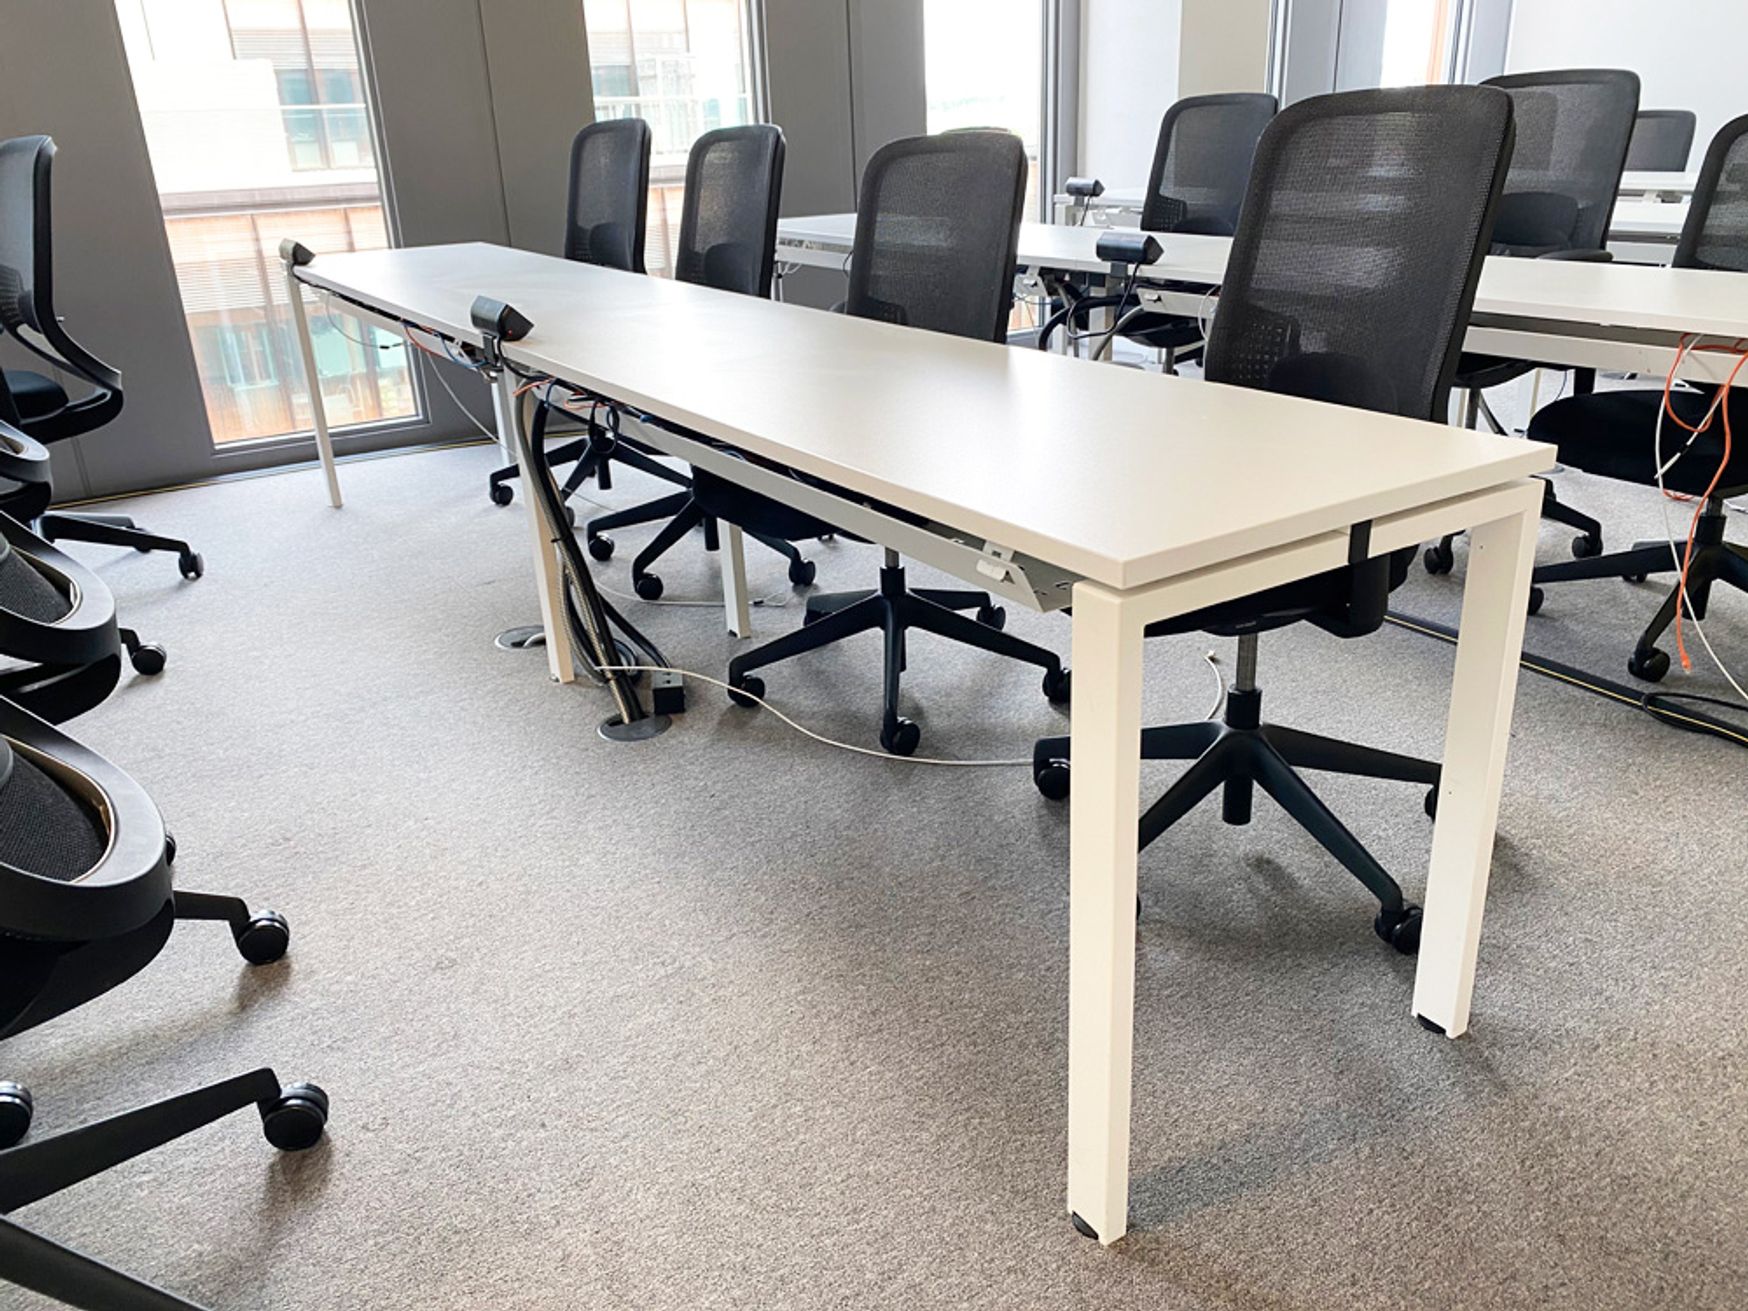 Used 4-person modern white training tables with cable trays